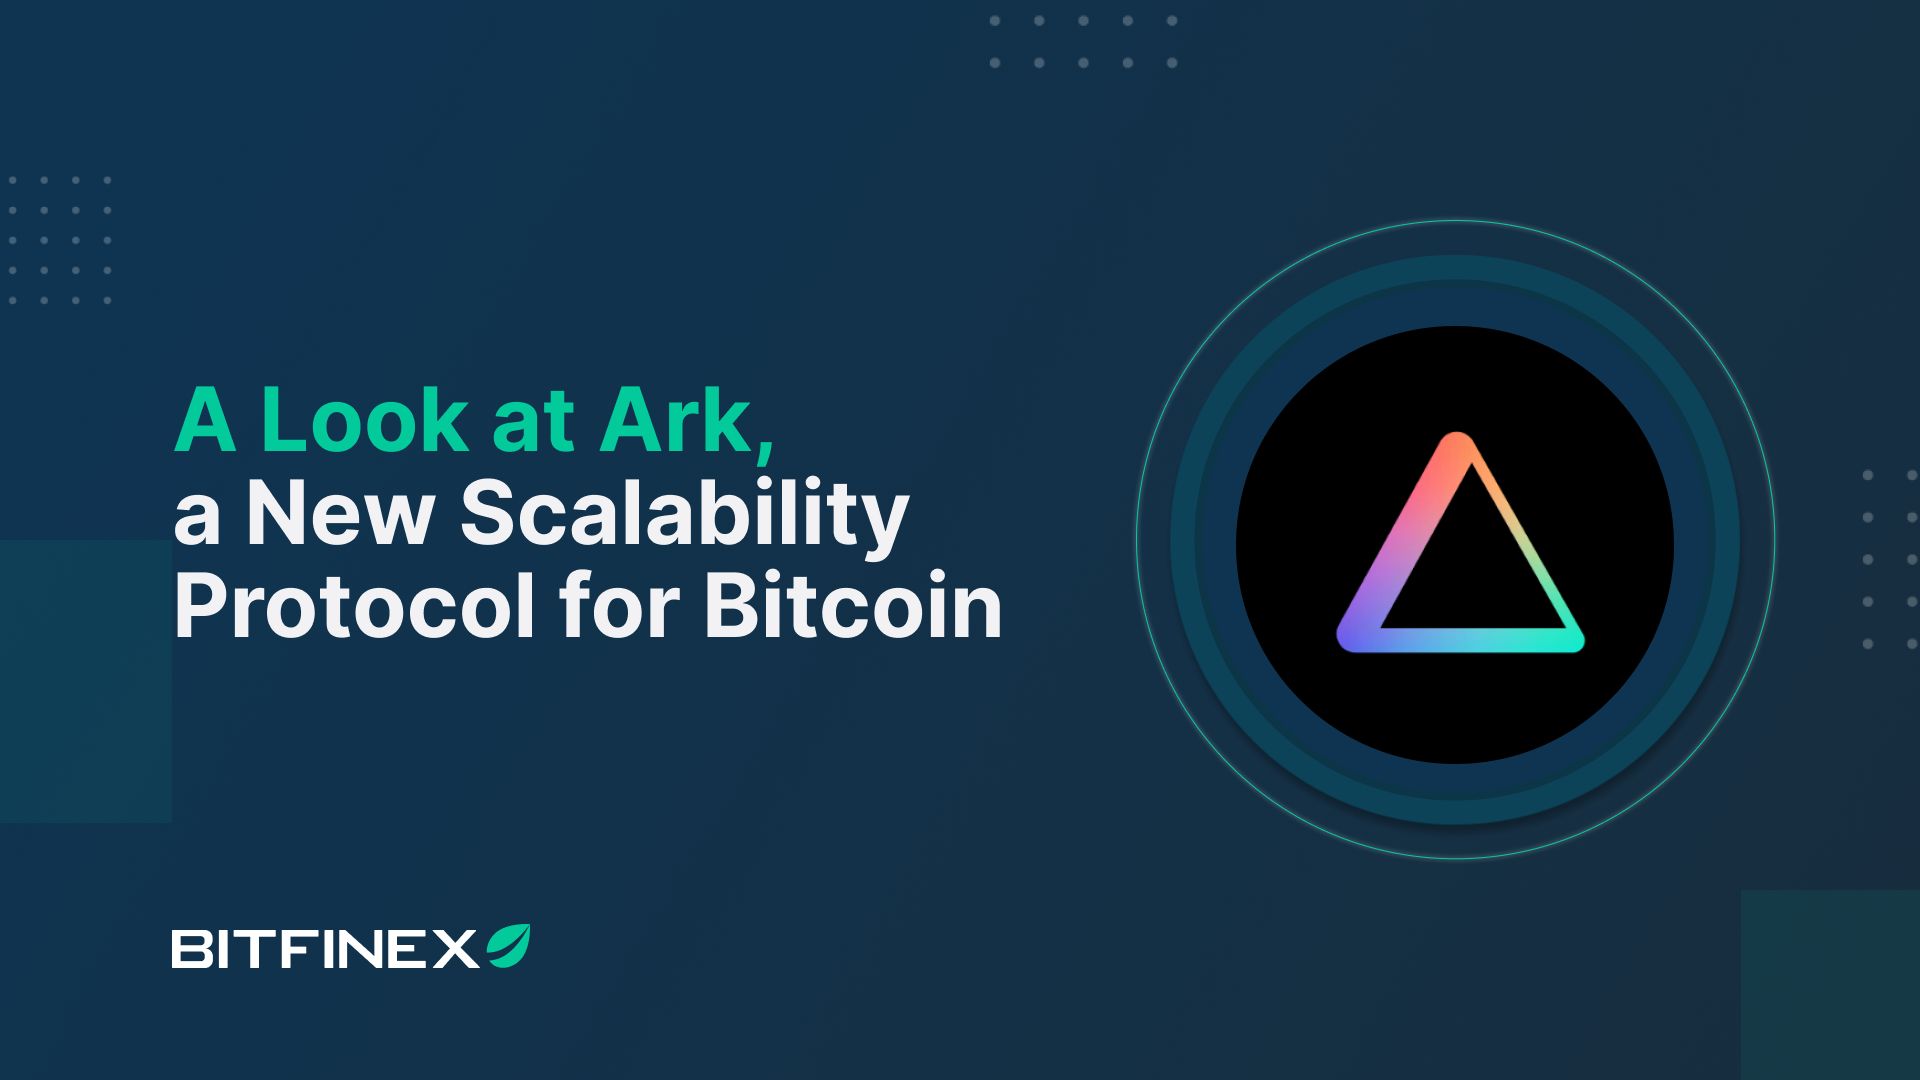 ARK Digital - Cryptocurrency Investment and Capital Management Platform